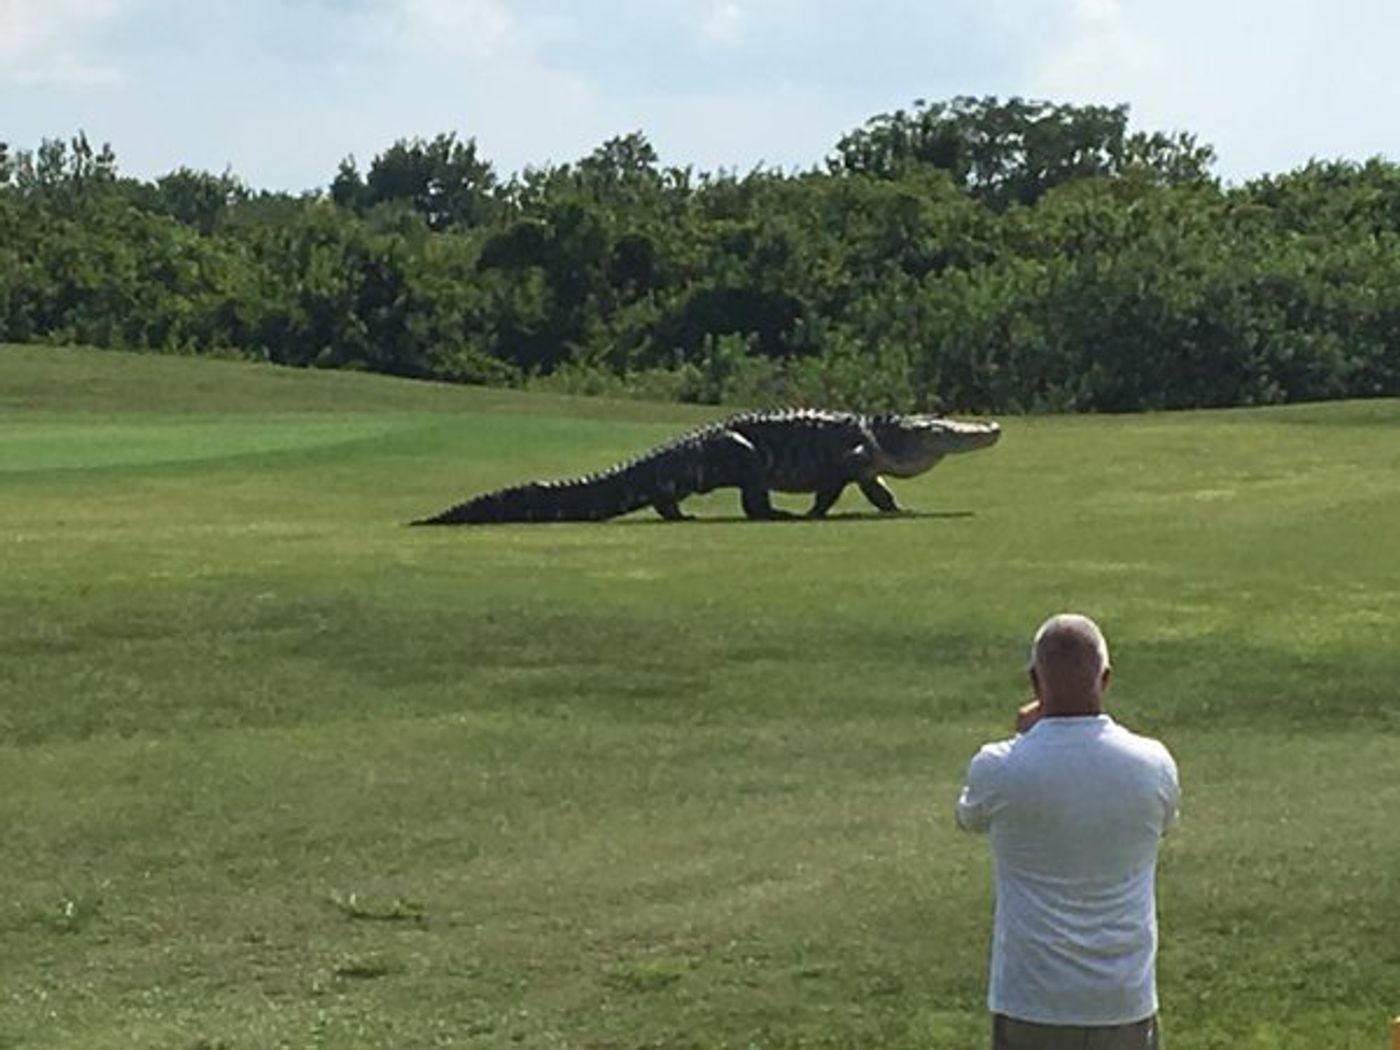 A gigantic gator is seen roaming the lands of the Buffalo Creek Golf Course in Florida.